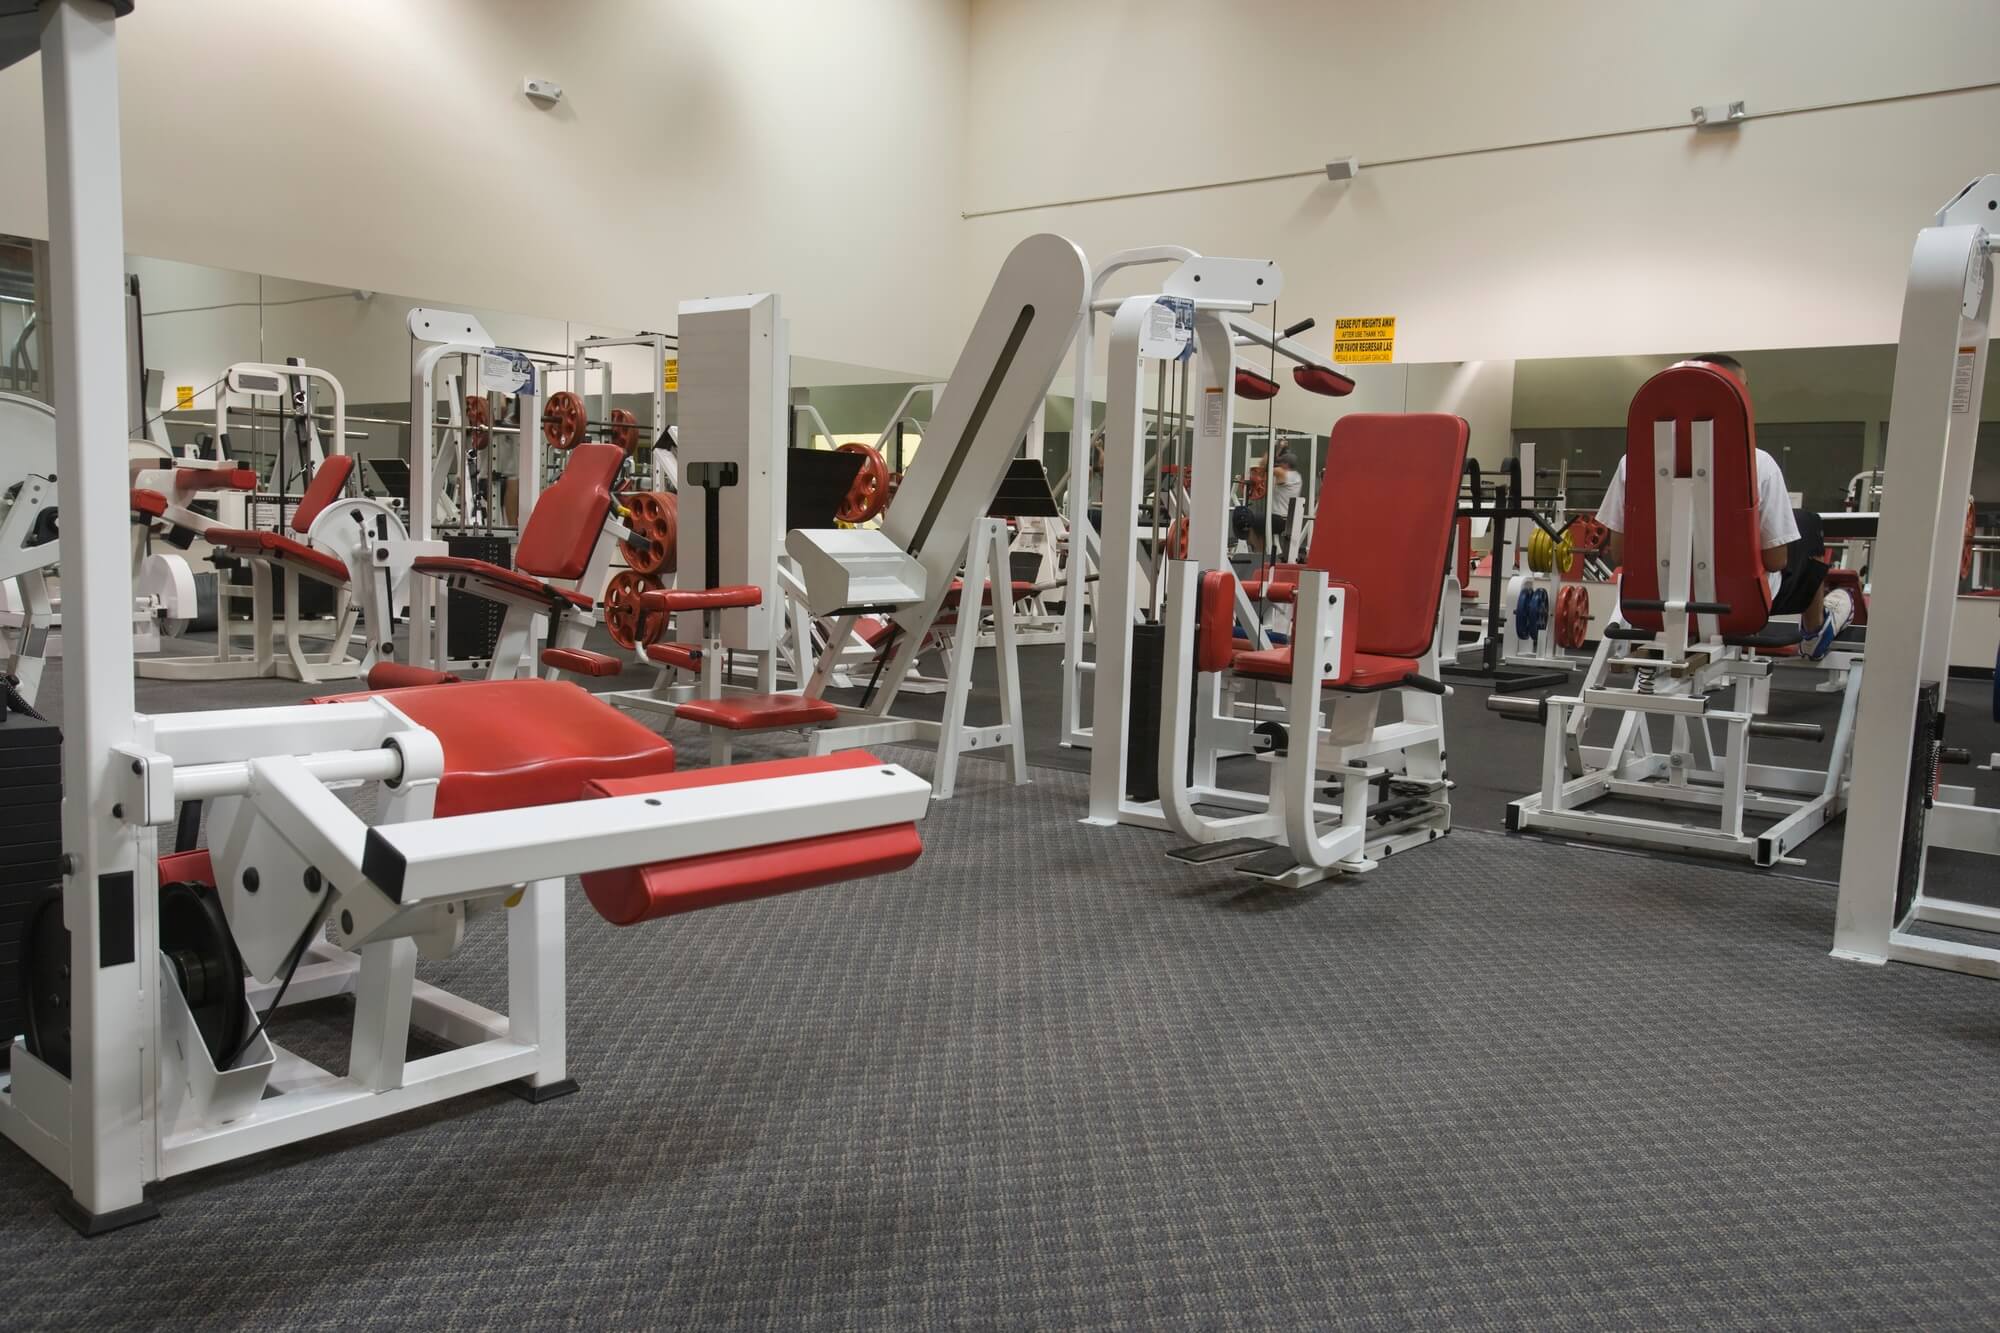 red gym equipment